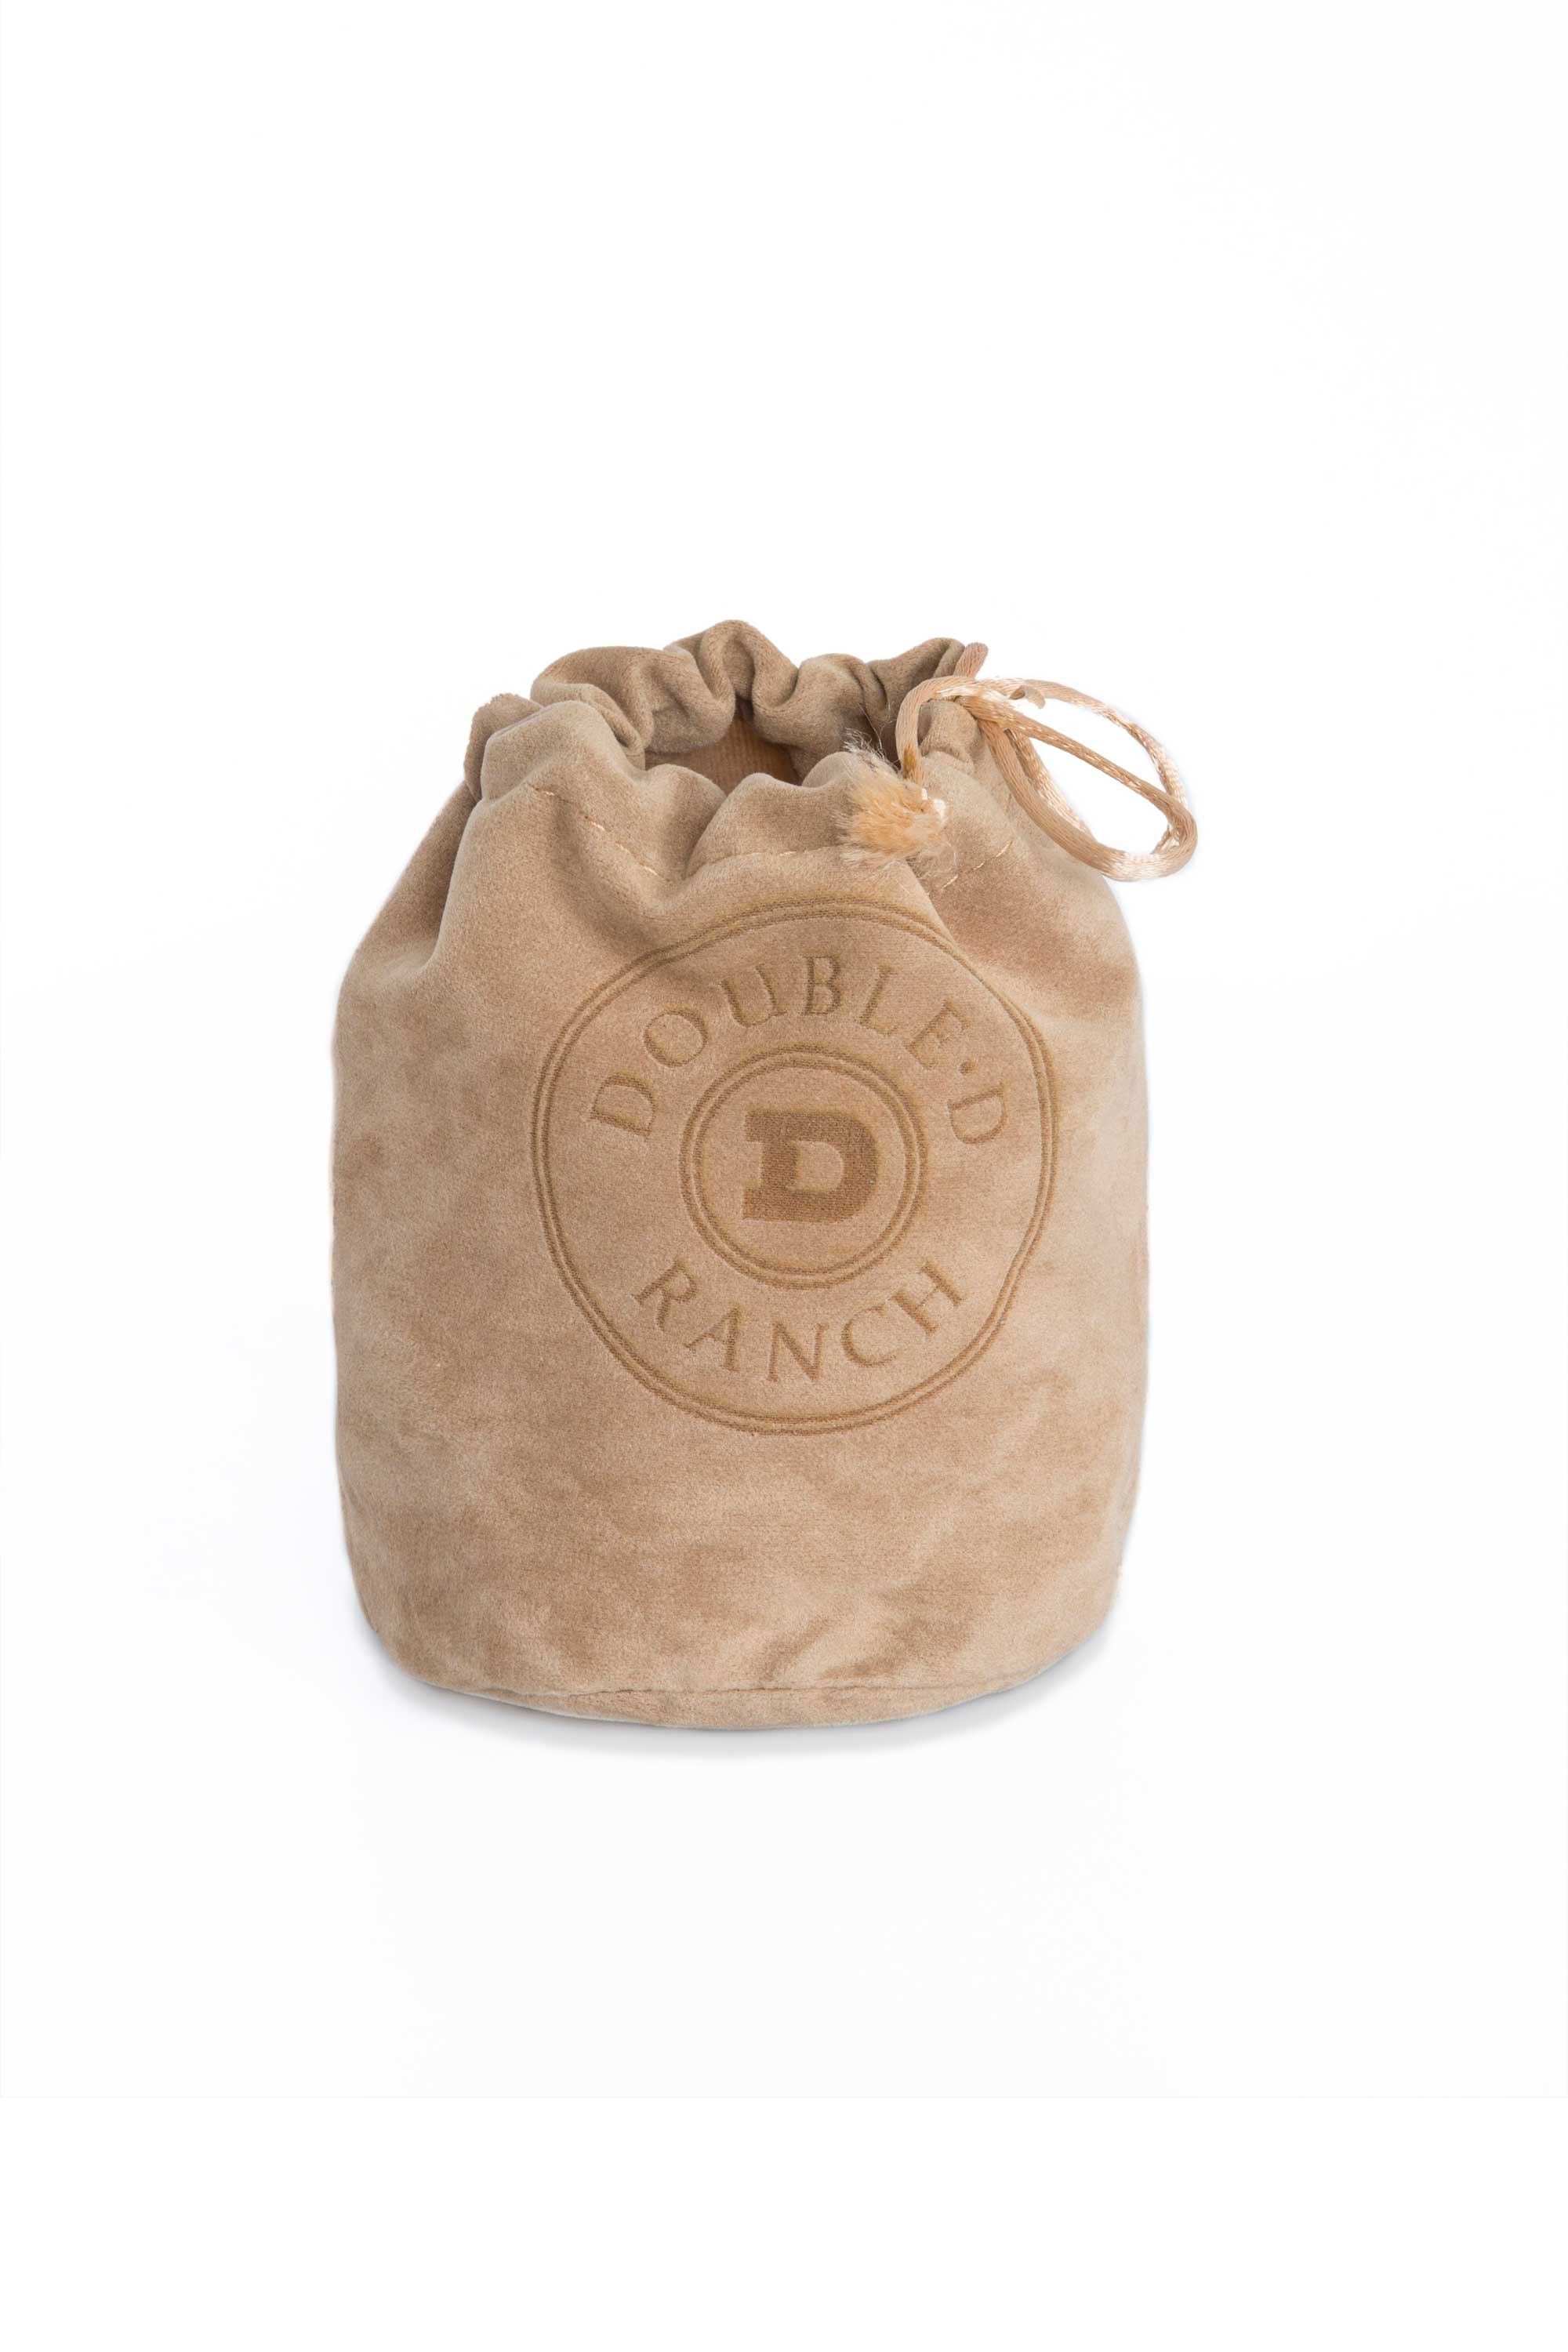 The Drawstring Jewelry Pouch